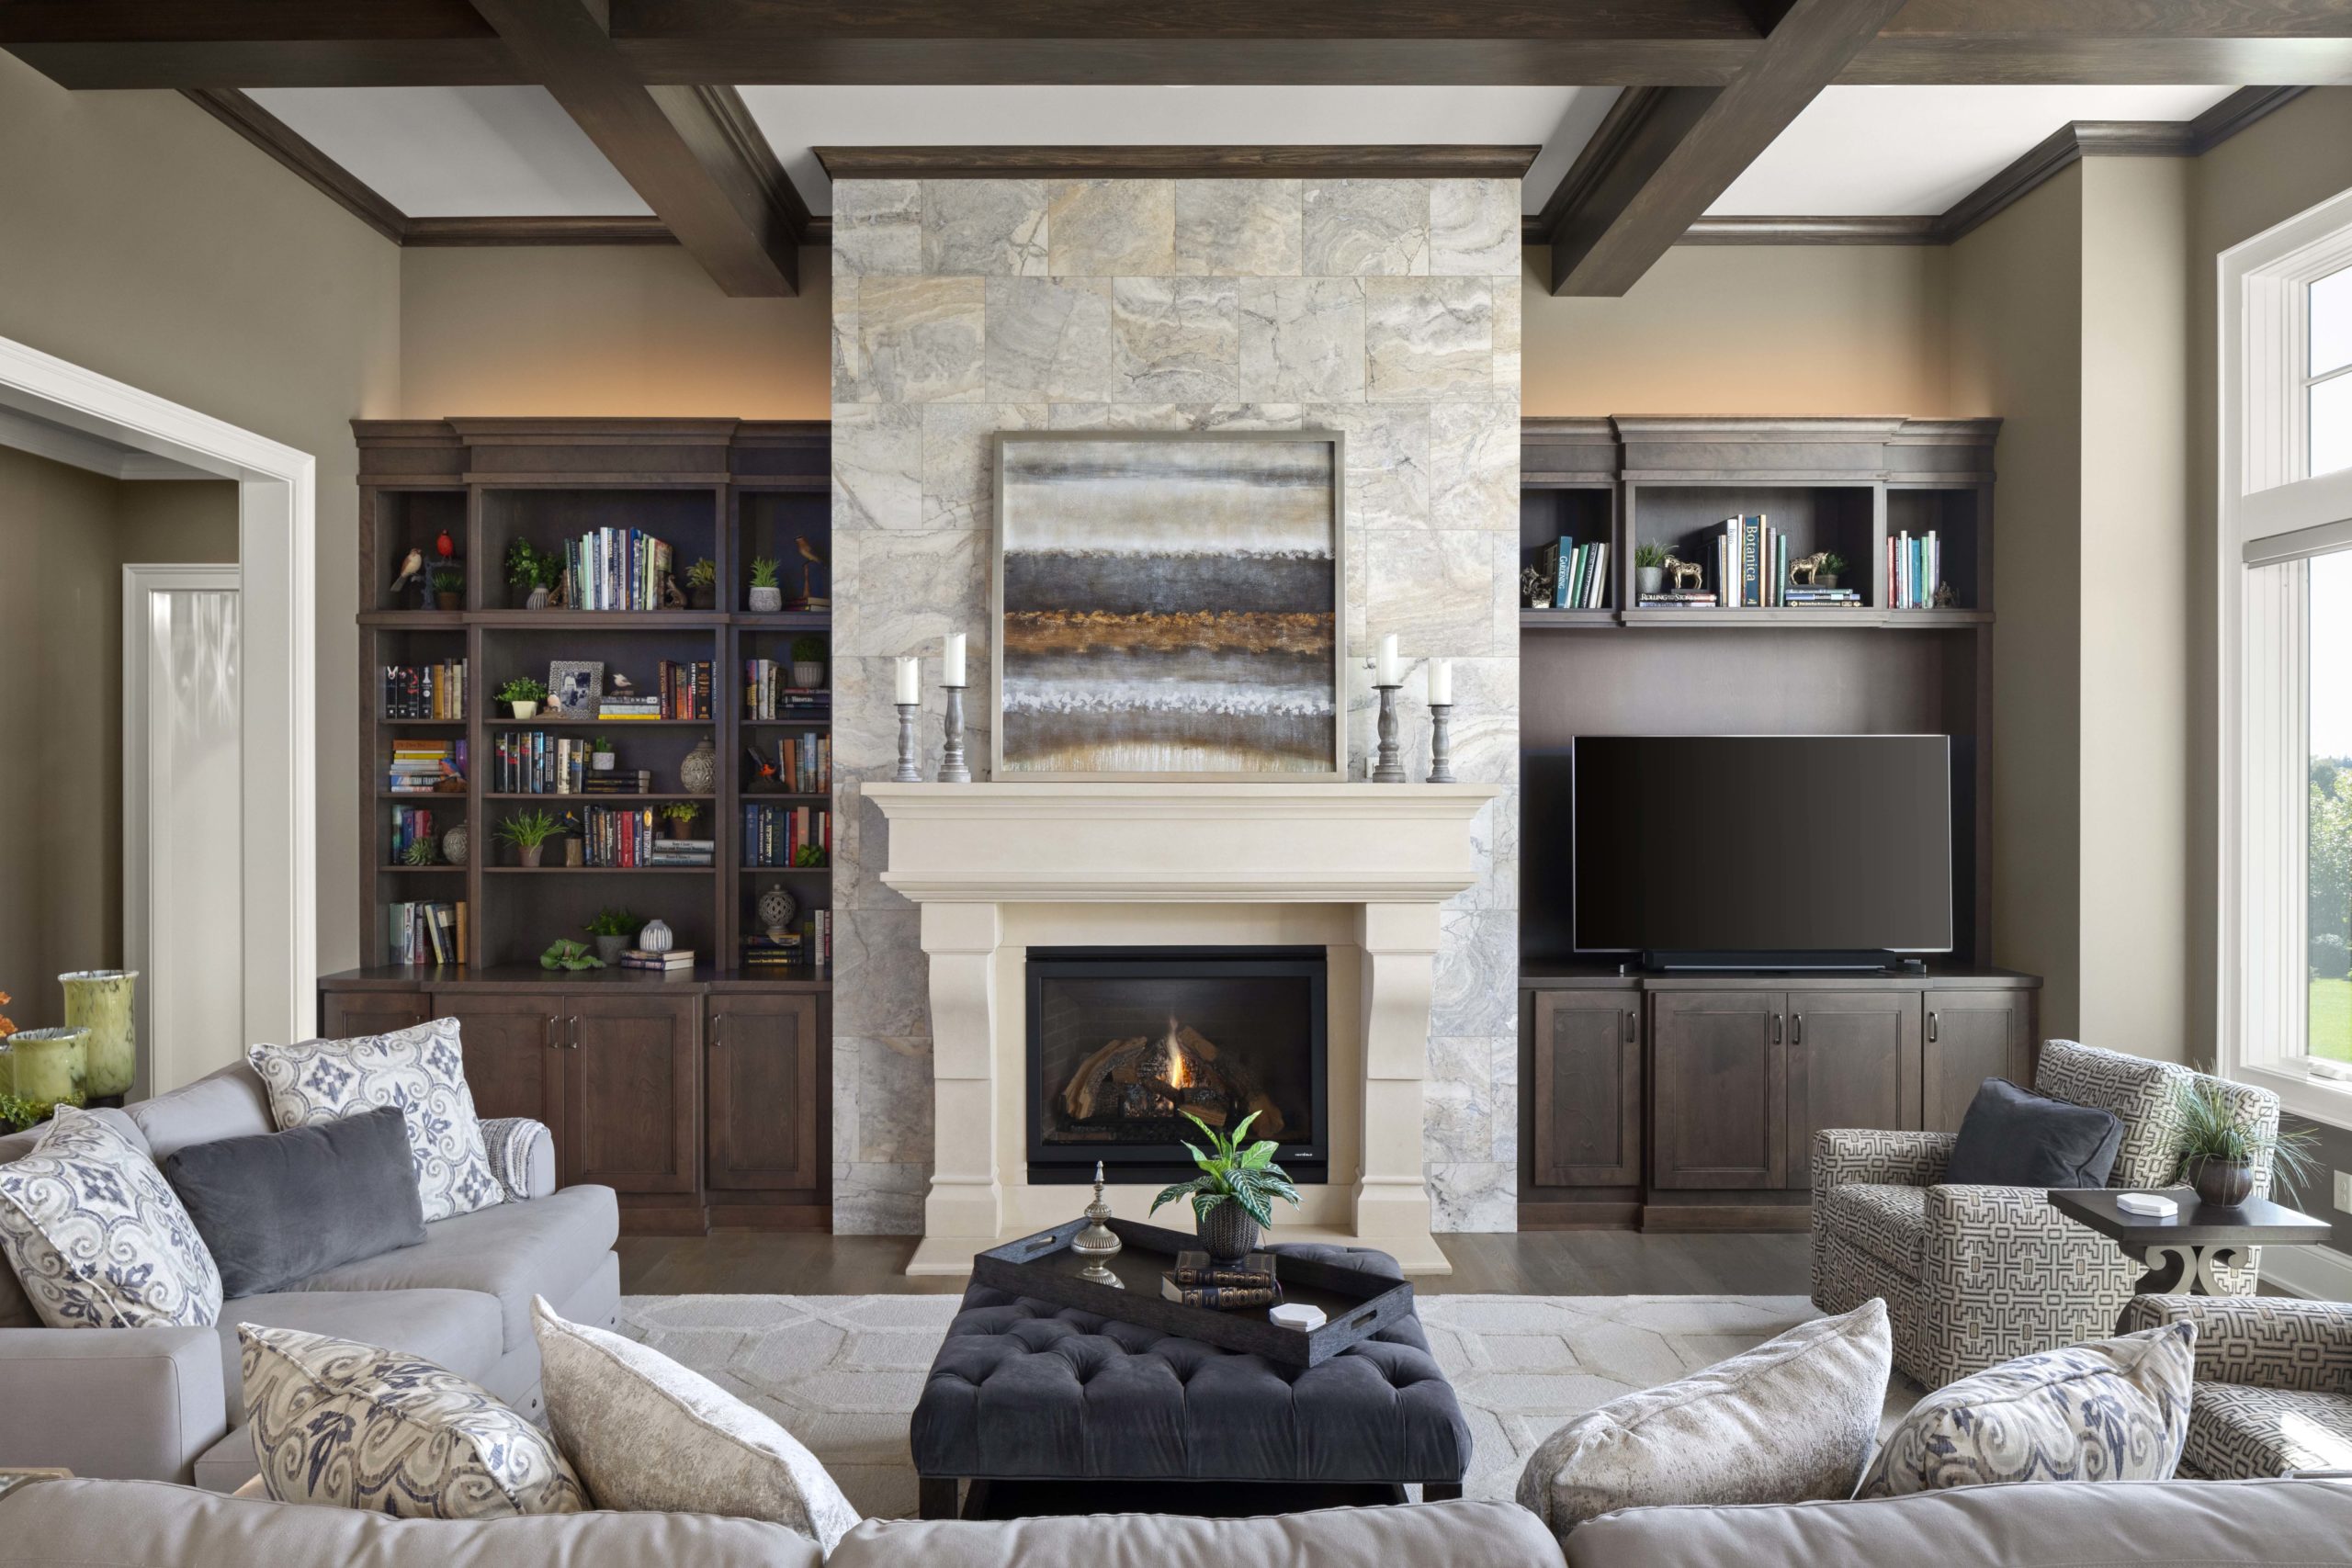 great room with stone fireplace surround, wood ceiling beams, and a sectional sofa